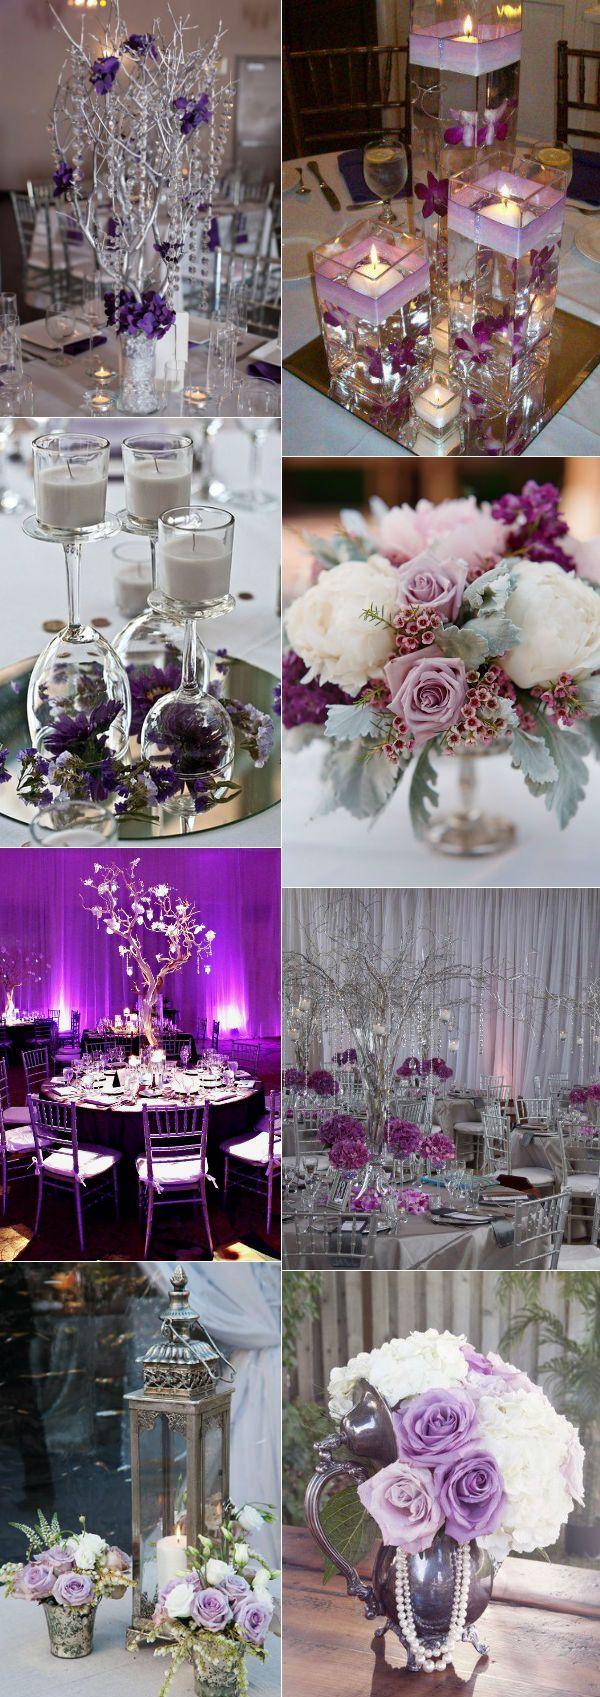 Свадьба - Stunning Wedding Color Ideas In Shades Of Purple And Silver